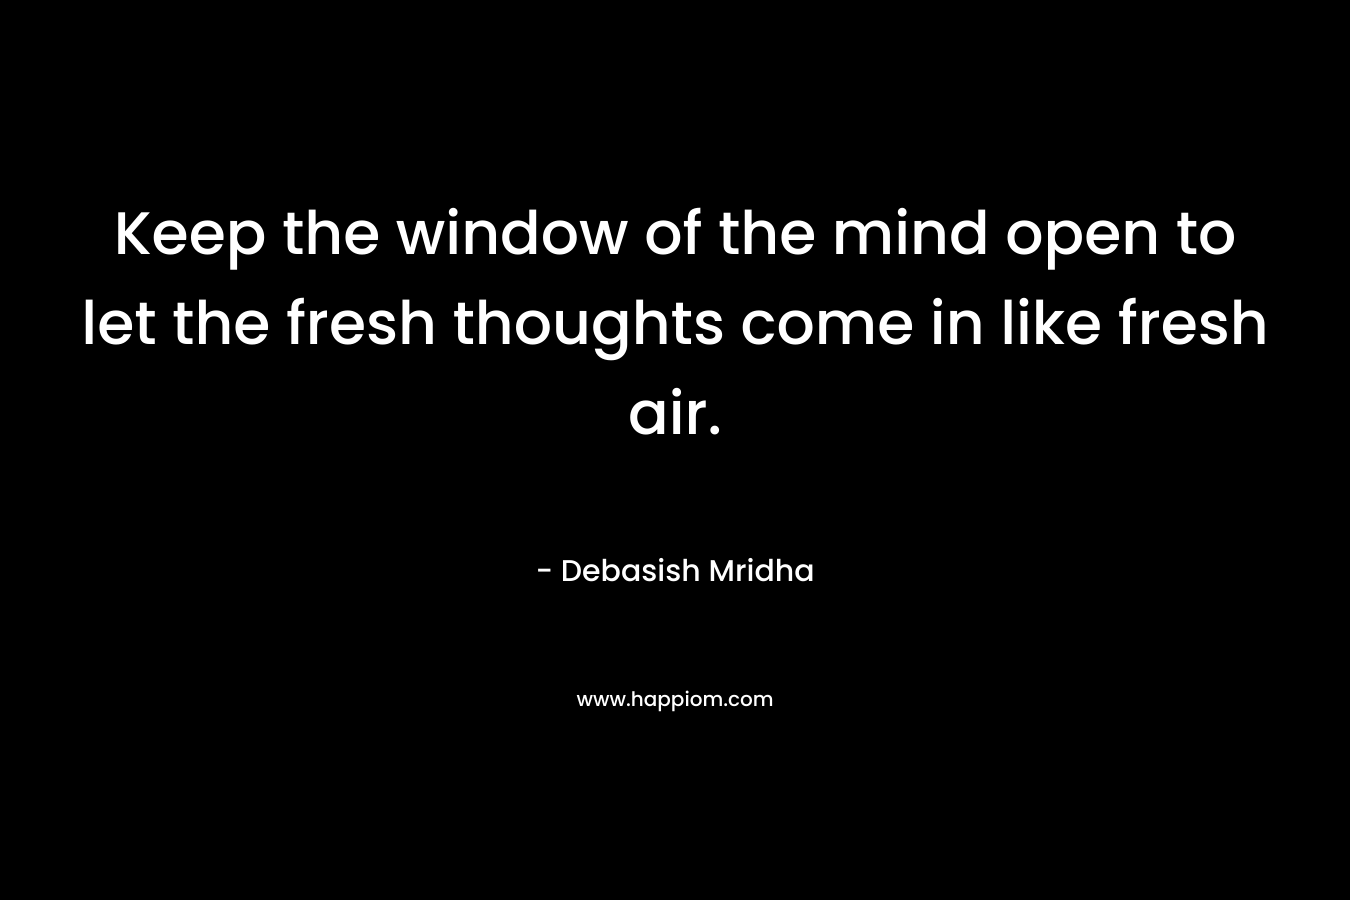 Keep the window of the mind open to let the fresh thoughts come in like fresh air.